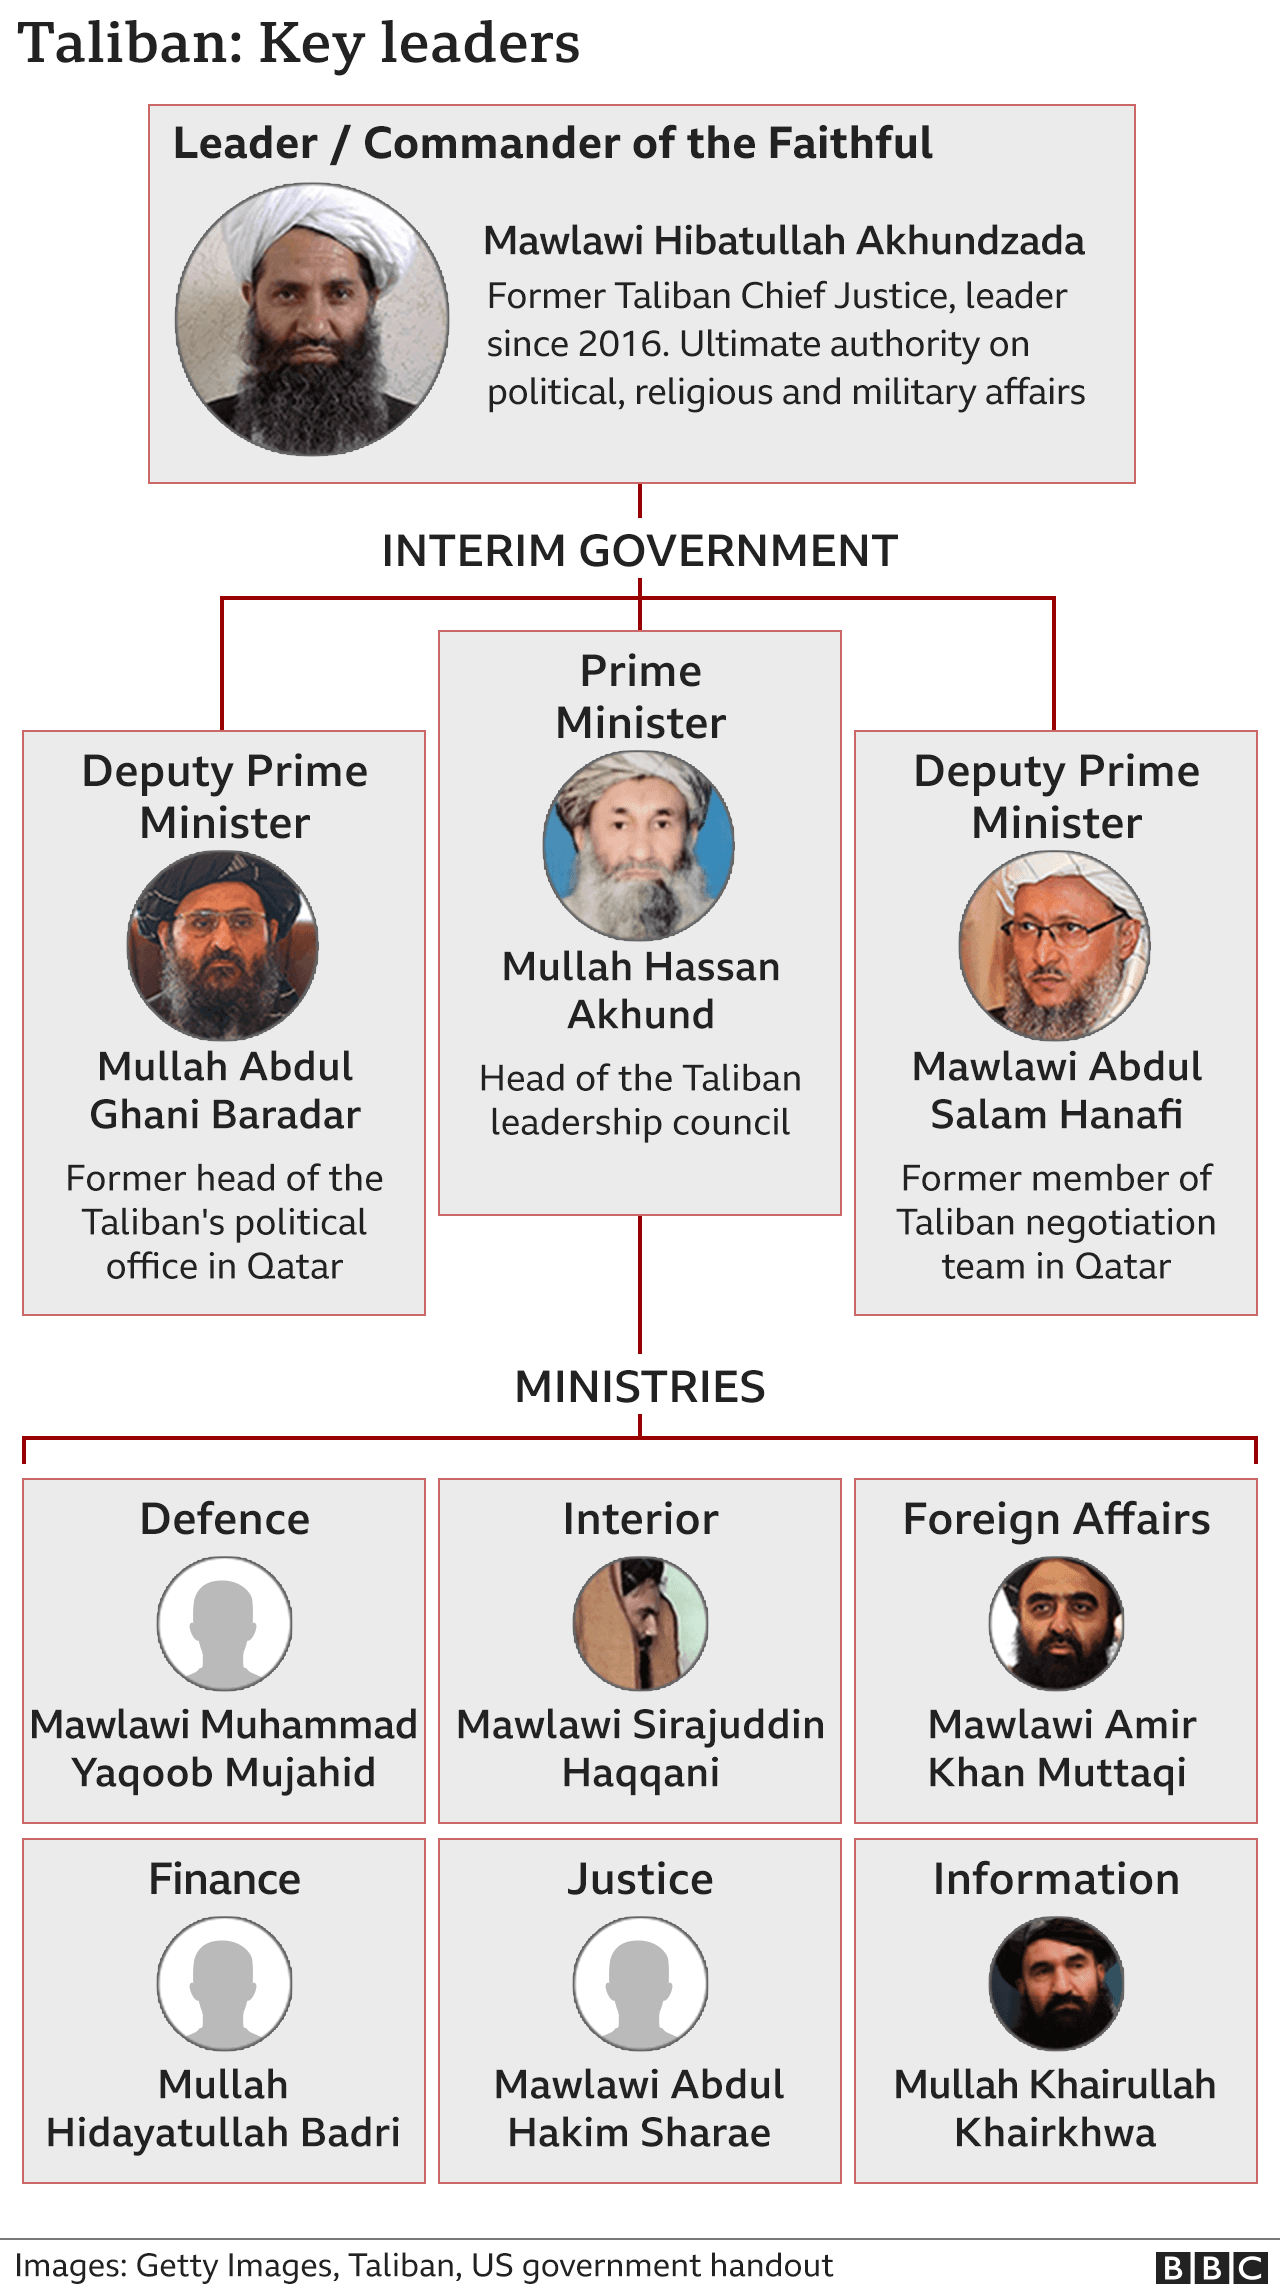 Graphic showing the Taliban leadership structure